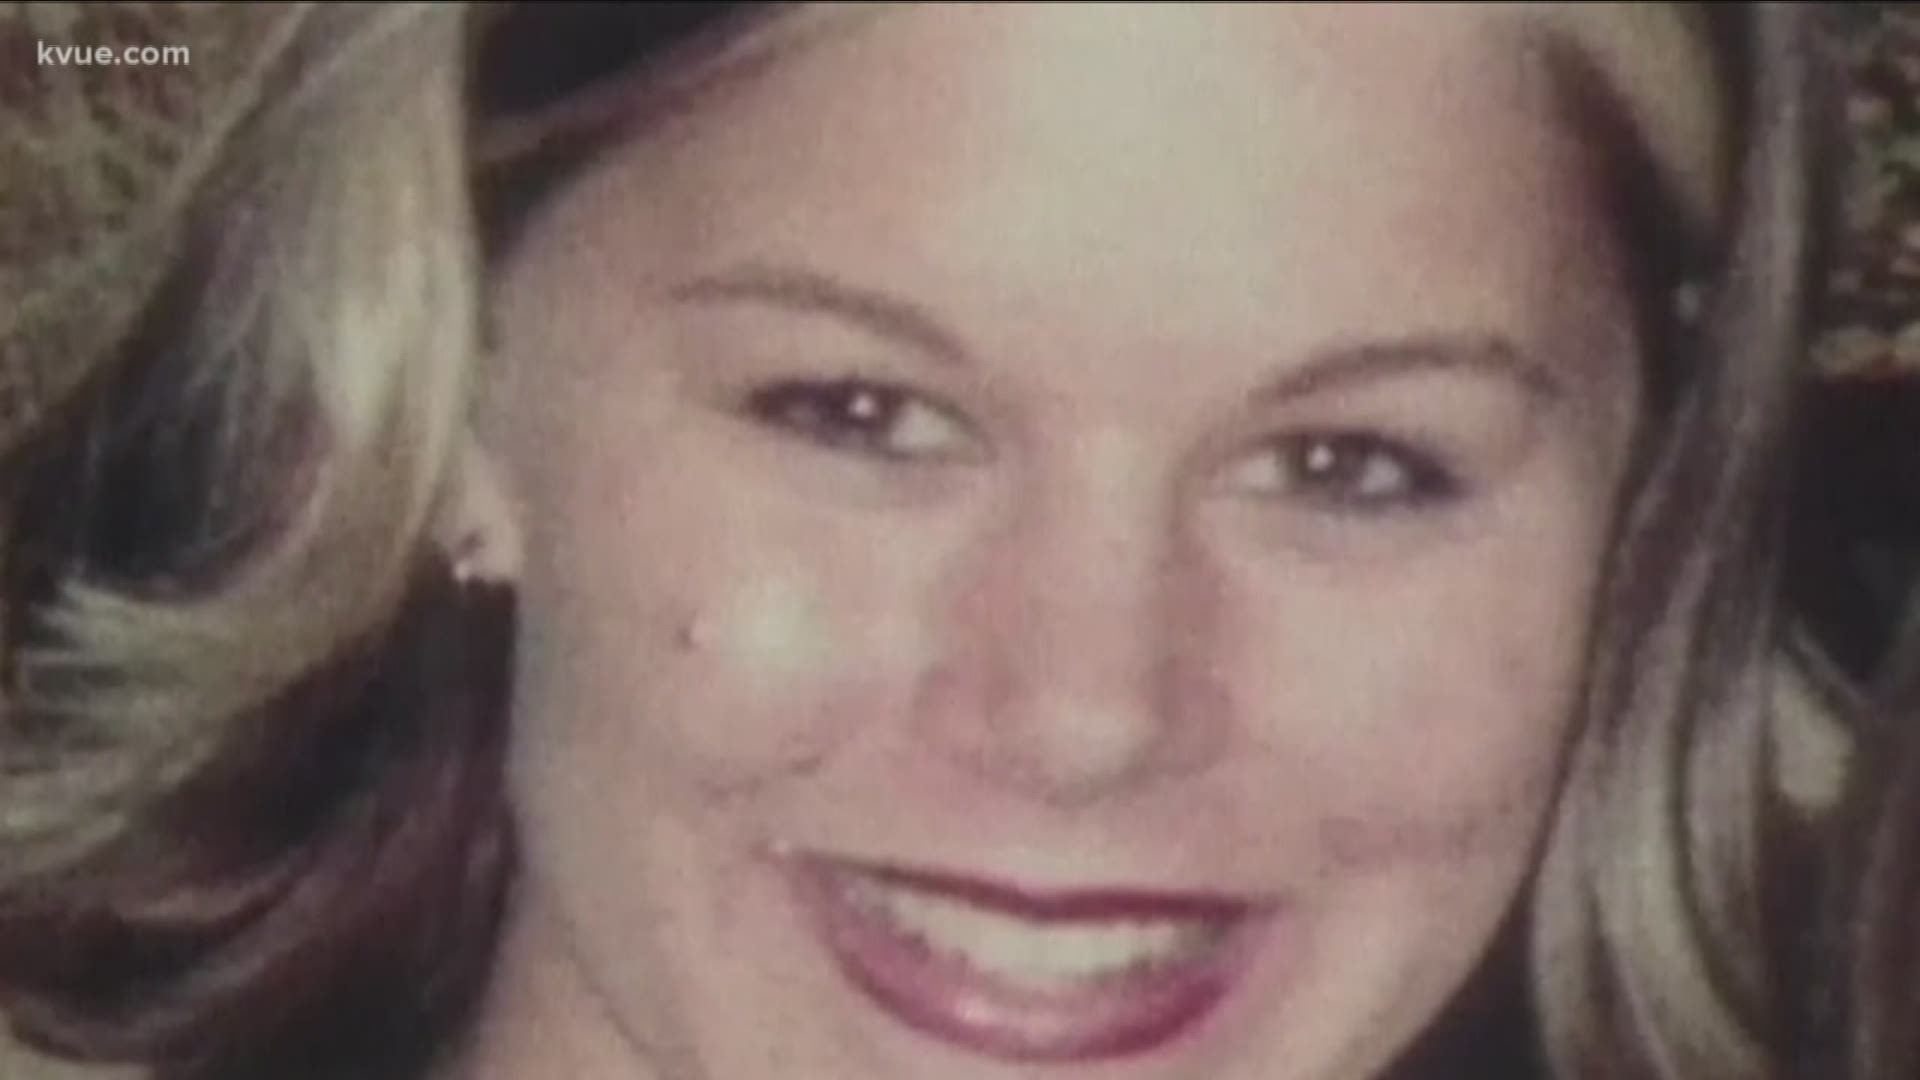 Seventeen years ago on January 10, a young Georgetown woman vanished.